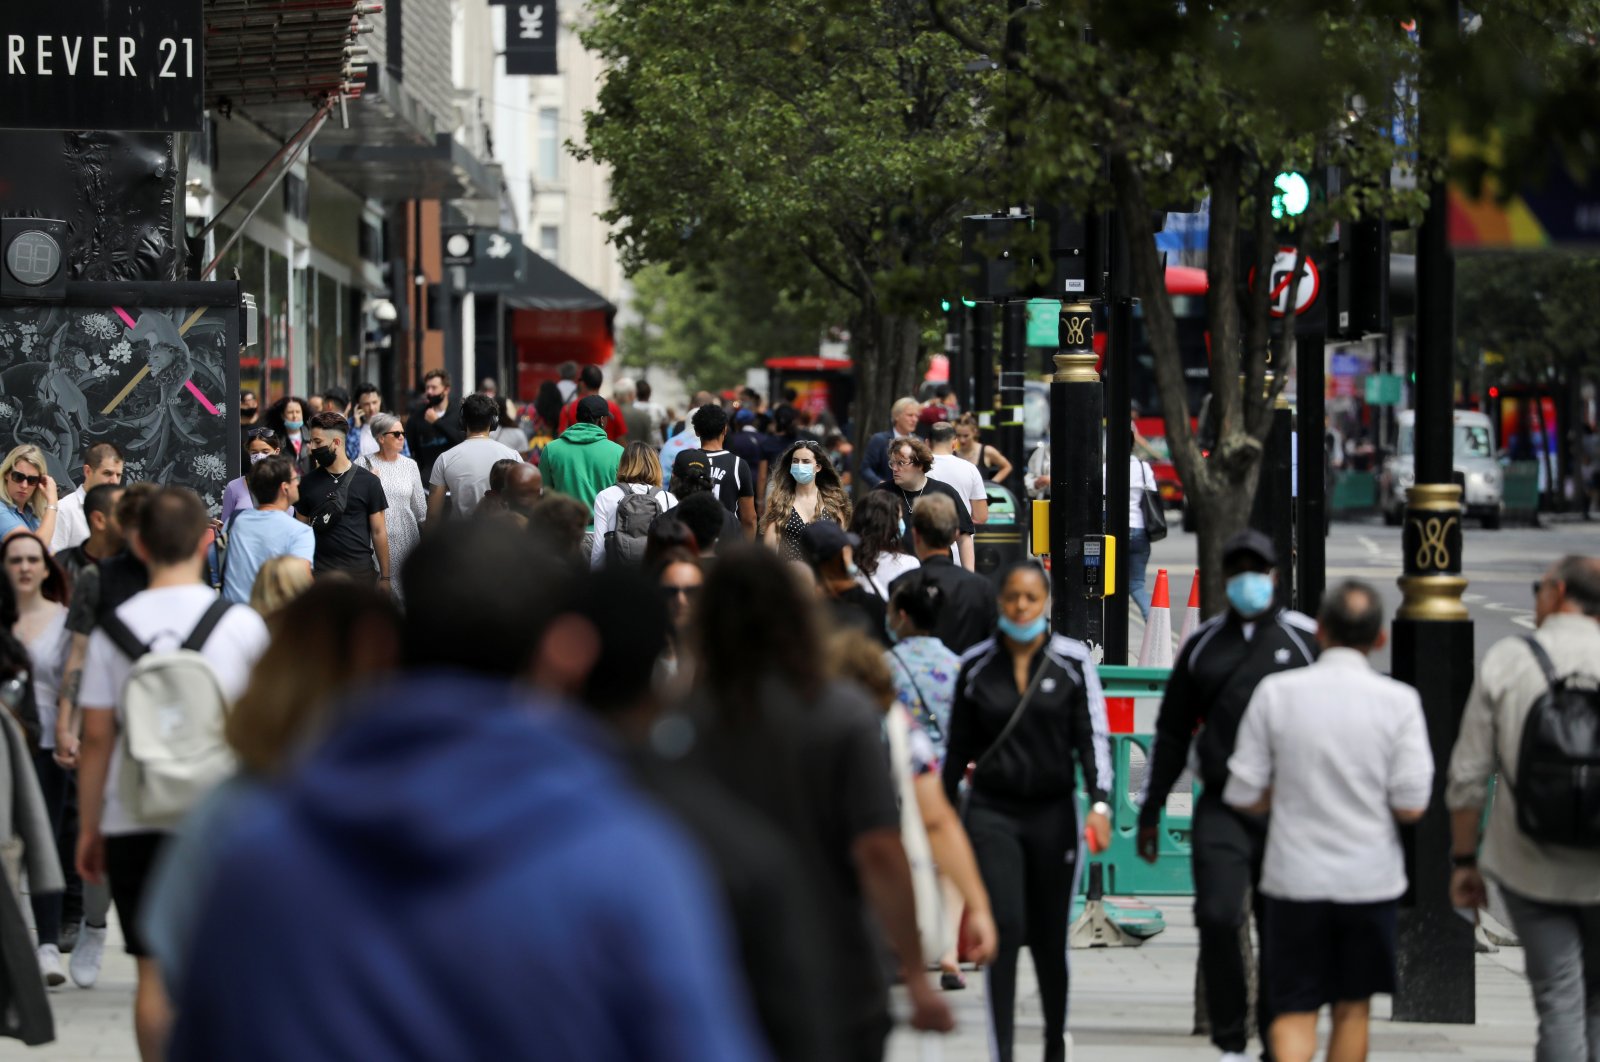 People, some of them wearing protective masks, walk down Oxford Street as the spread of the coronavirus disease (COVID-19) continues, in London, Britain July 24, 2020. (REUTERS Photo)